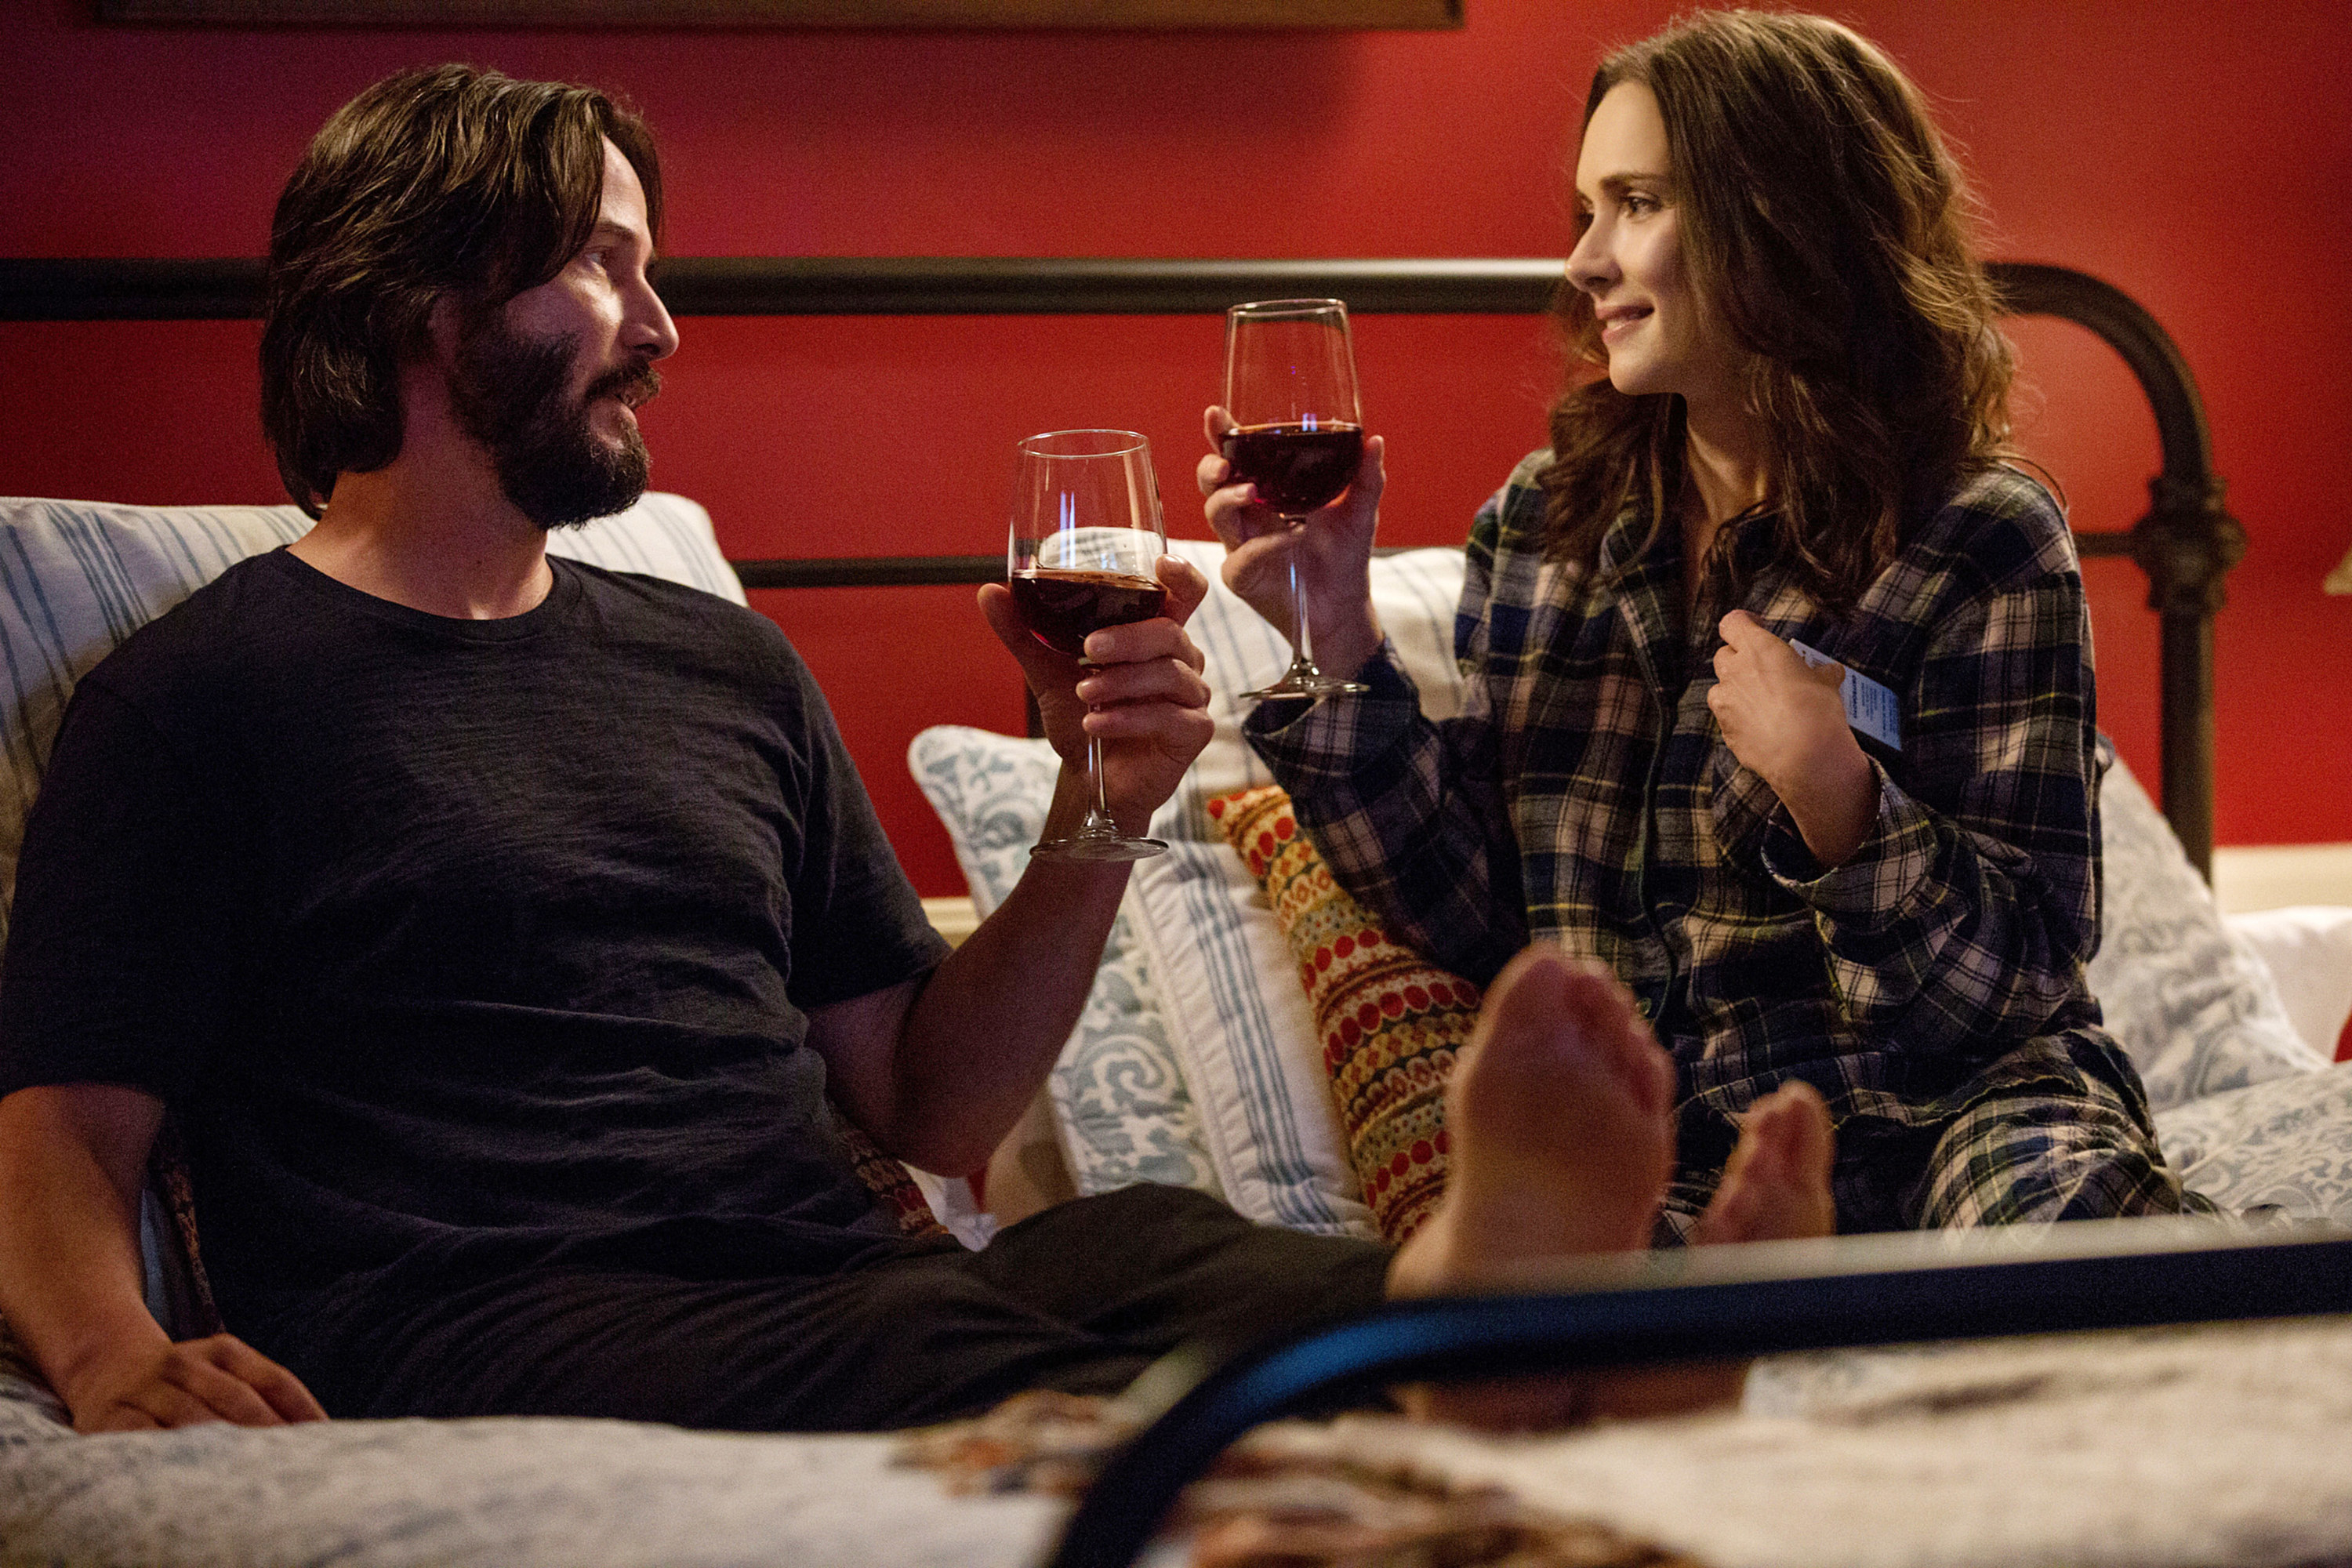 sitting in bed, they toast their wine glasses together